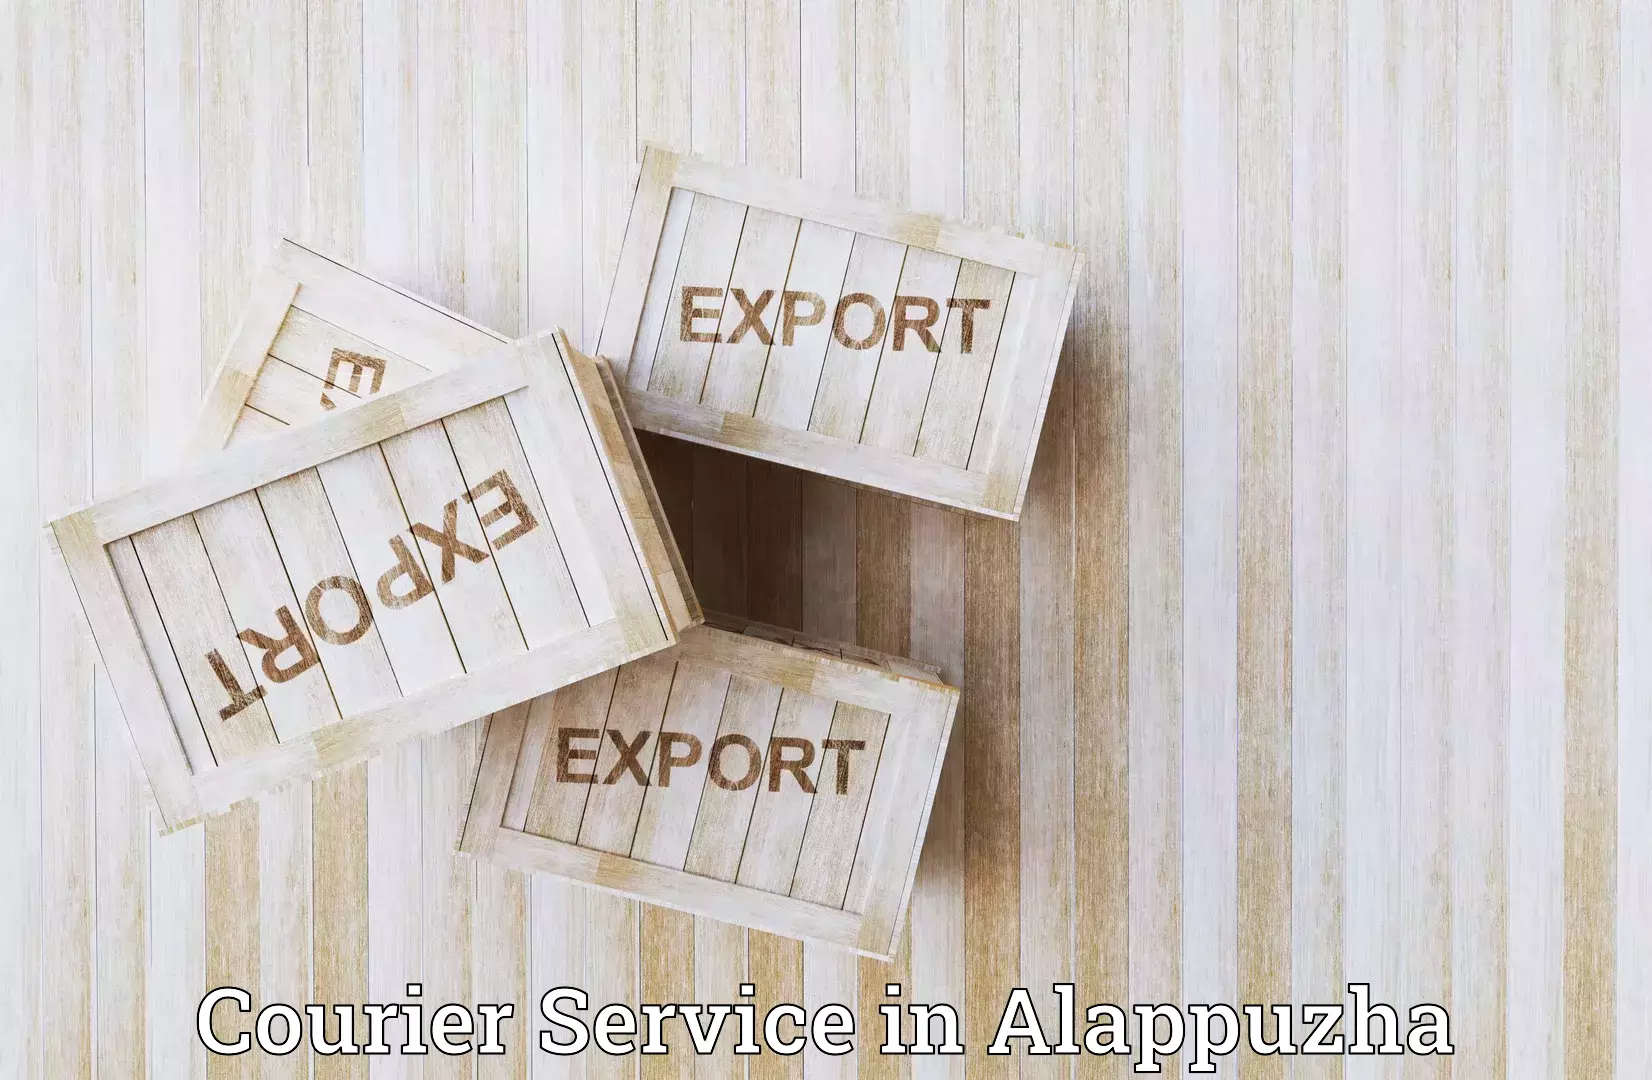 Next-day freight services in Alappuzha